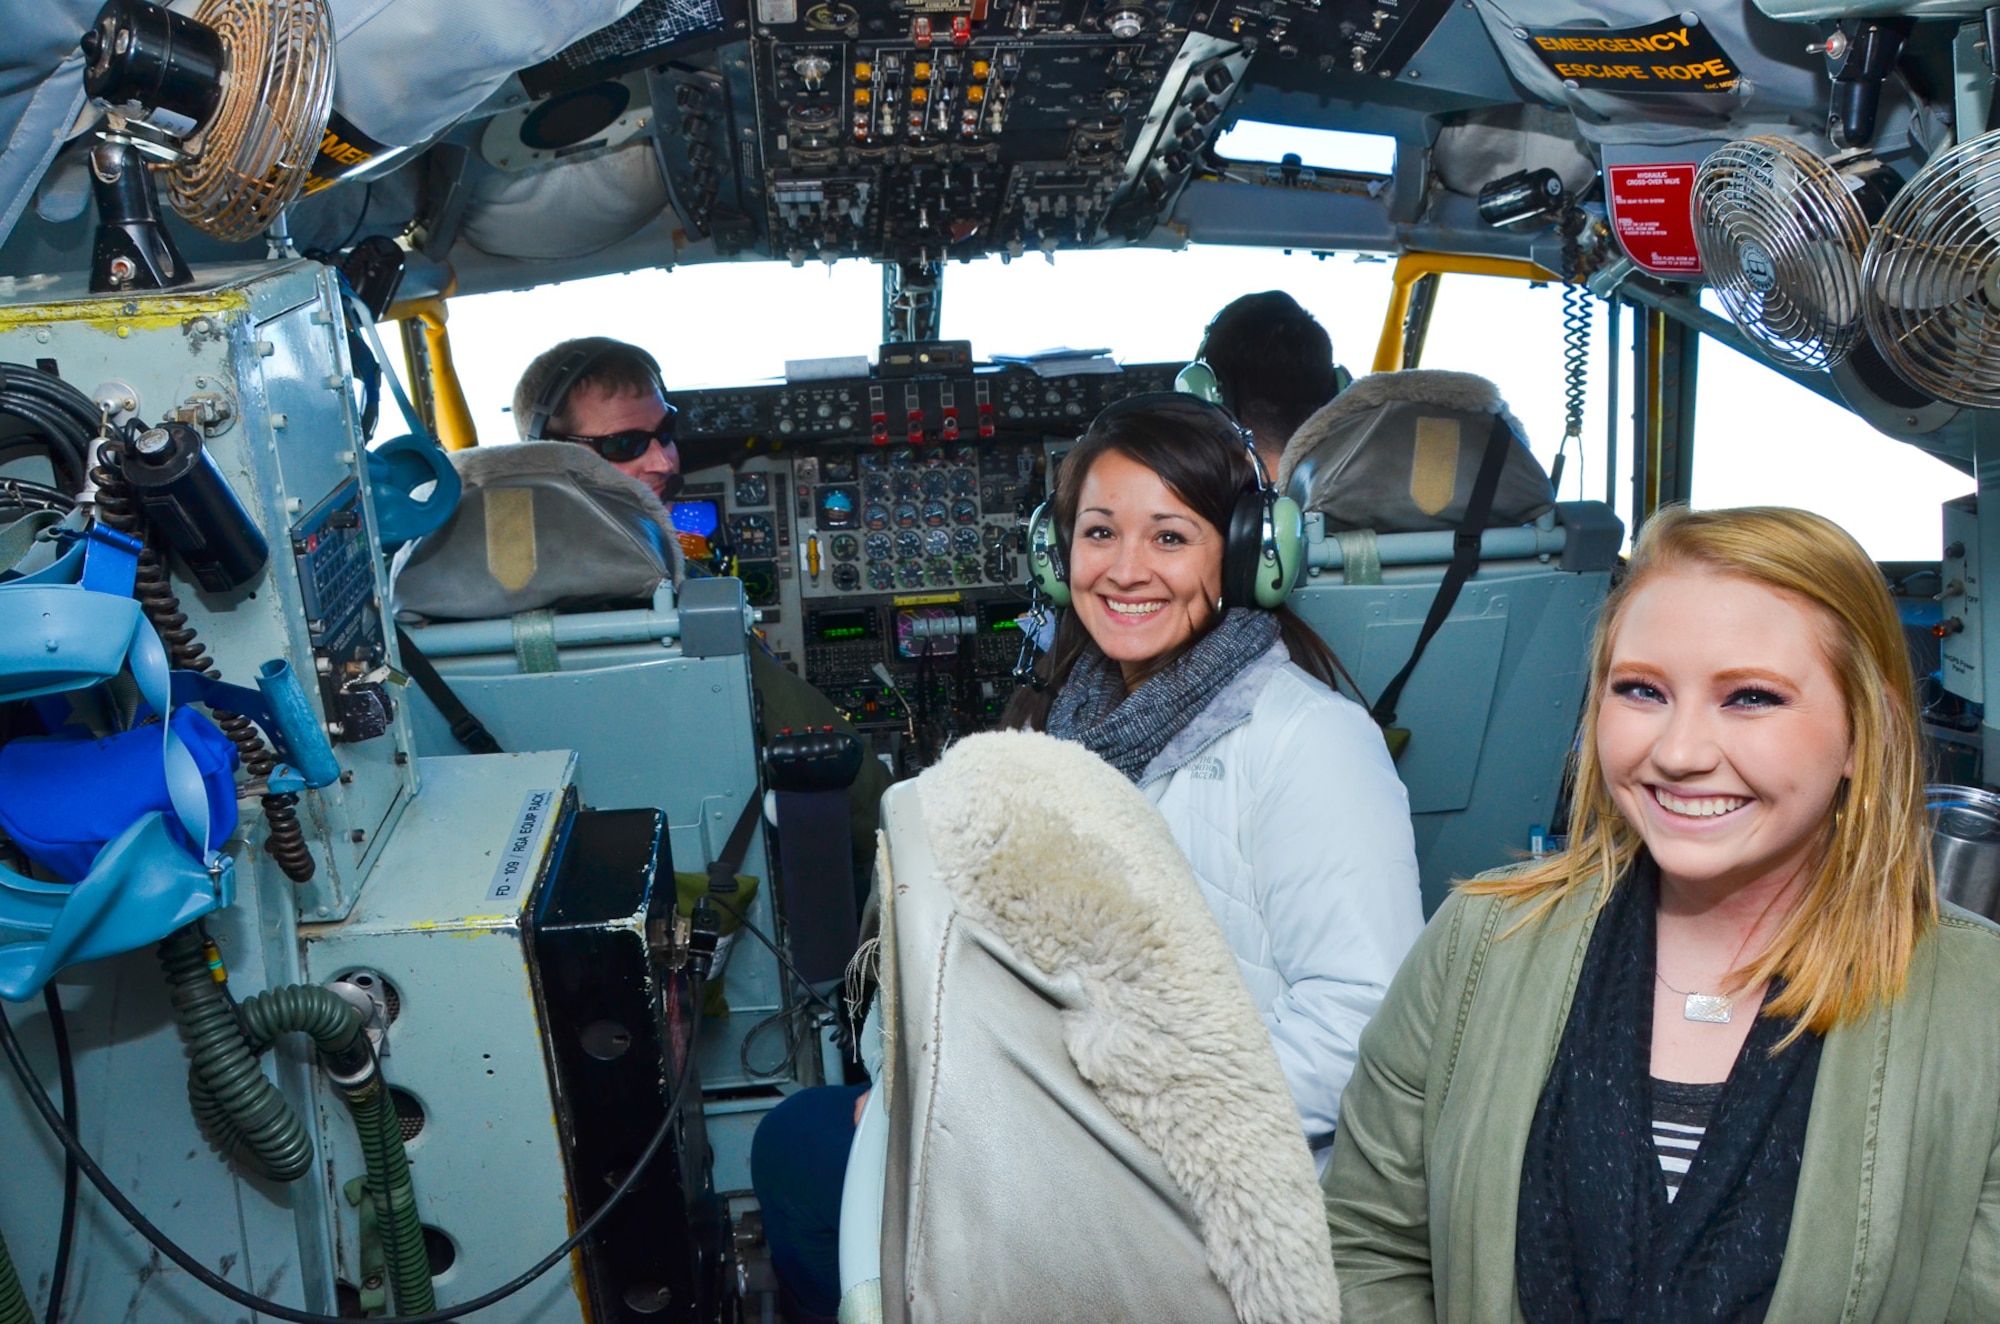 Spouses from two Alabama Air National Guard units to took a ride in a  KC-135R Stratotanker over Montgomery, Ala. as part of an incentive flight, January 9, 2016. The flight which  involved the 117th Air Refueling Wing and the 187th Fighter Wing  helped spouses learn more about the Air Guard mission.  (U.S. Air National Guard photo by: Senior Airman Wesley Jones/Released)